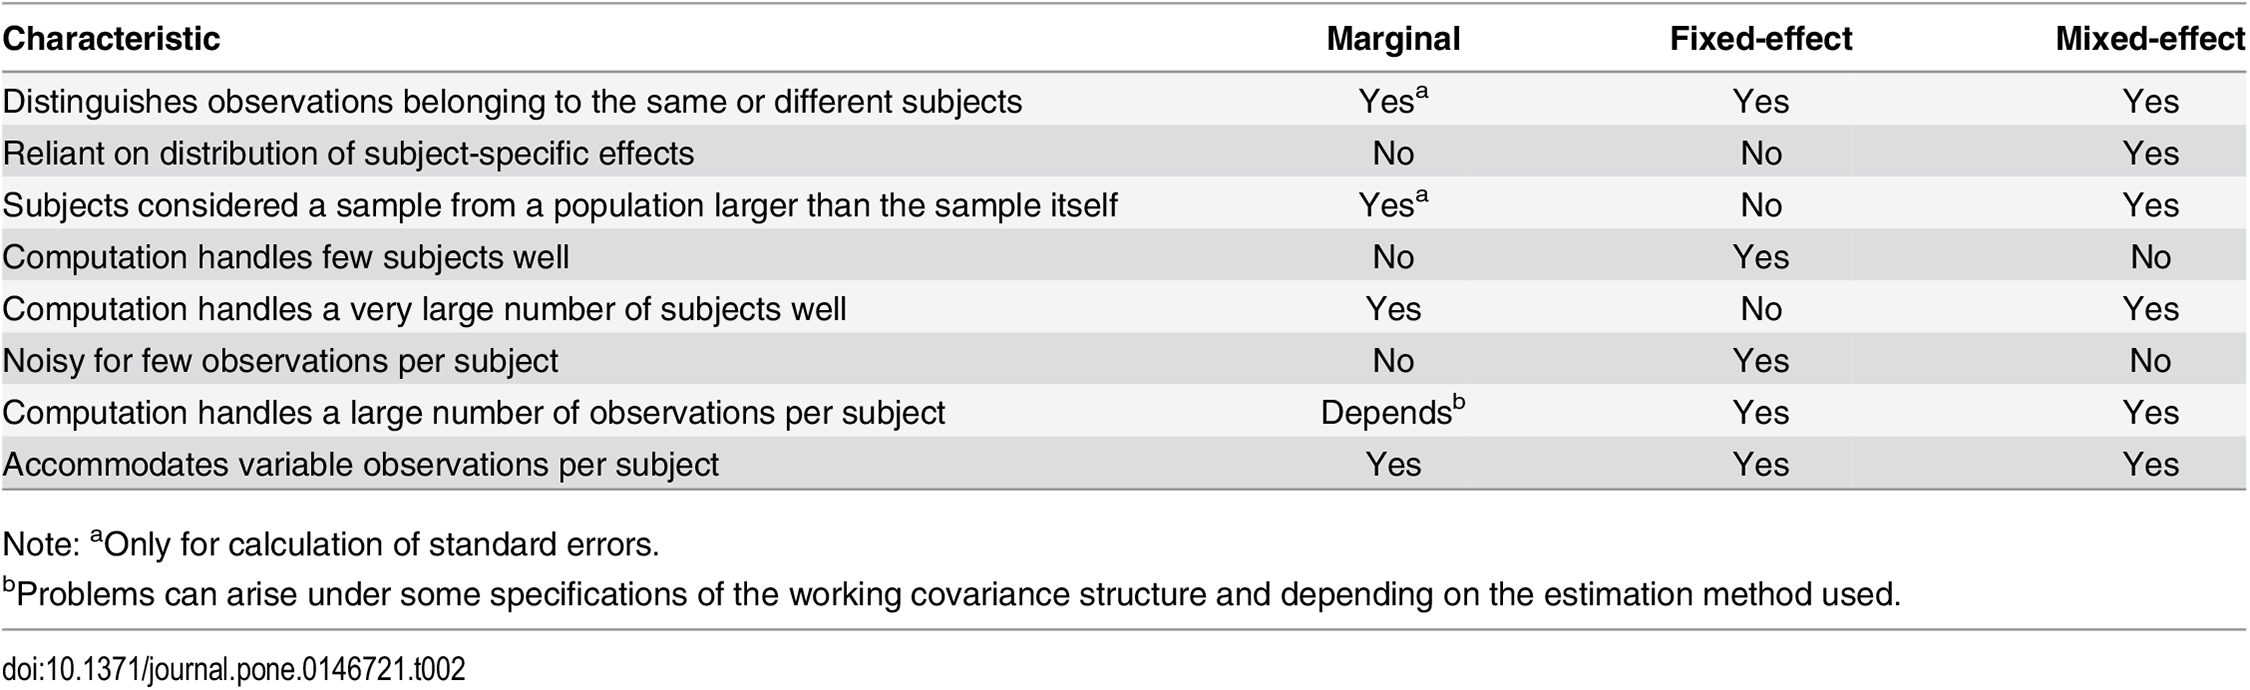 Hierarchical modeling decision table from Moen et al.